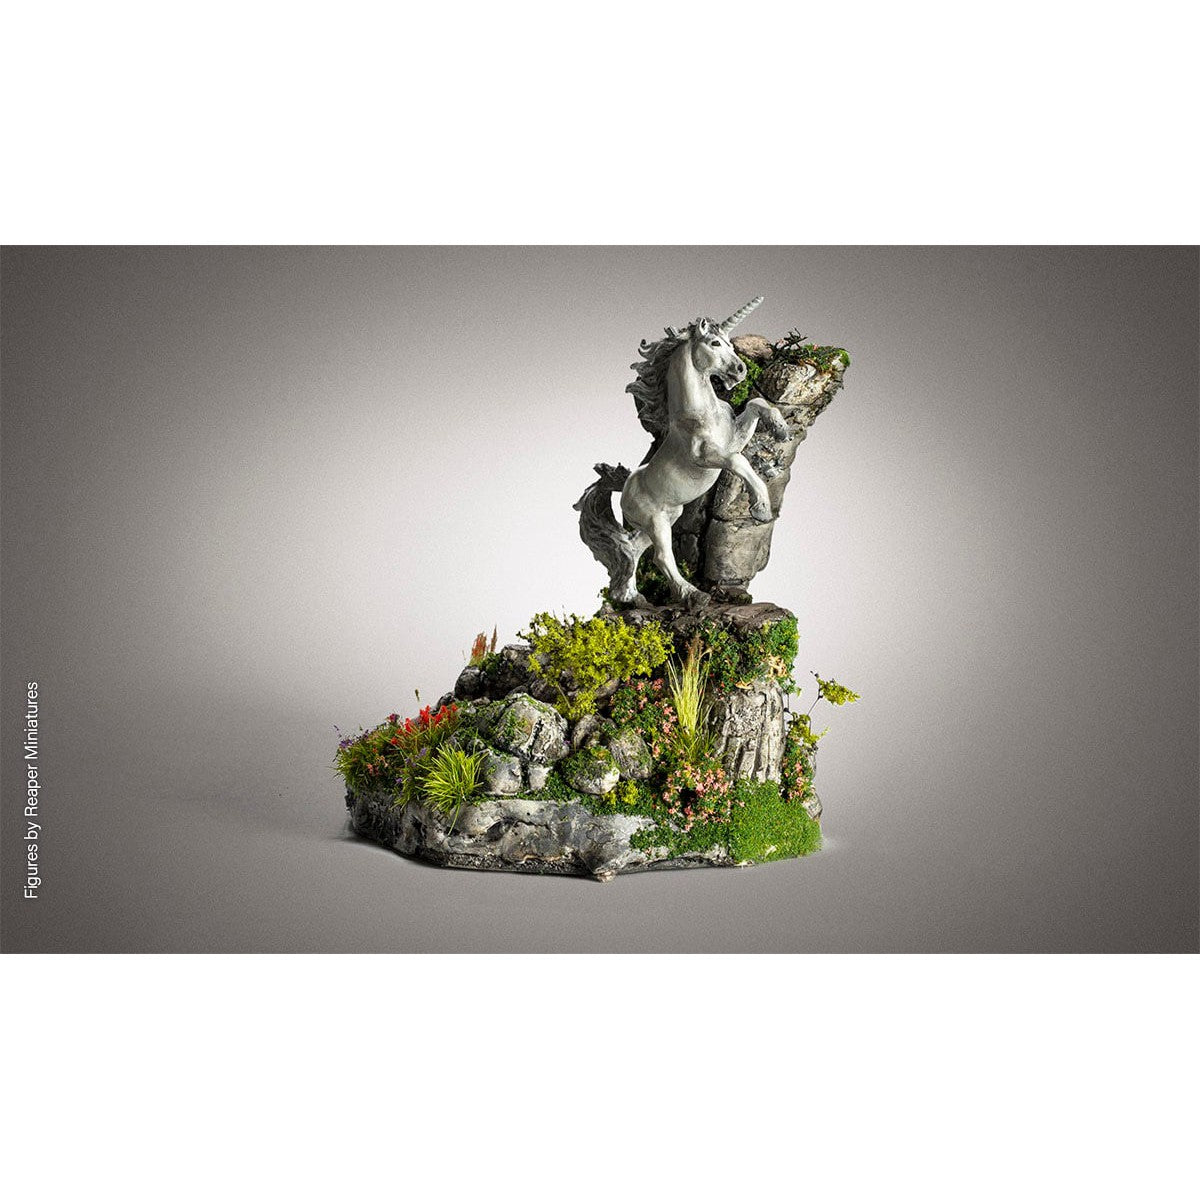 EZ Bushes - Summer Mix - Apply Summer Mix EZ Bushes right out of the package and onto your terrain feature, miniature base or gaming board